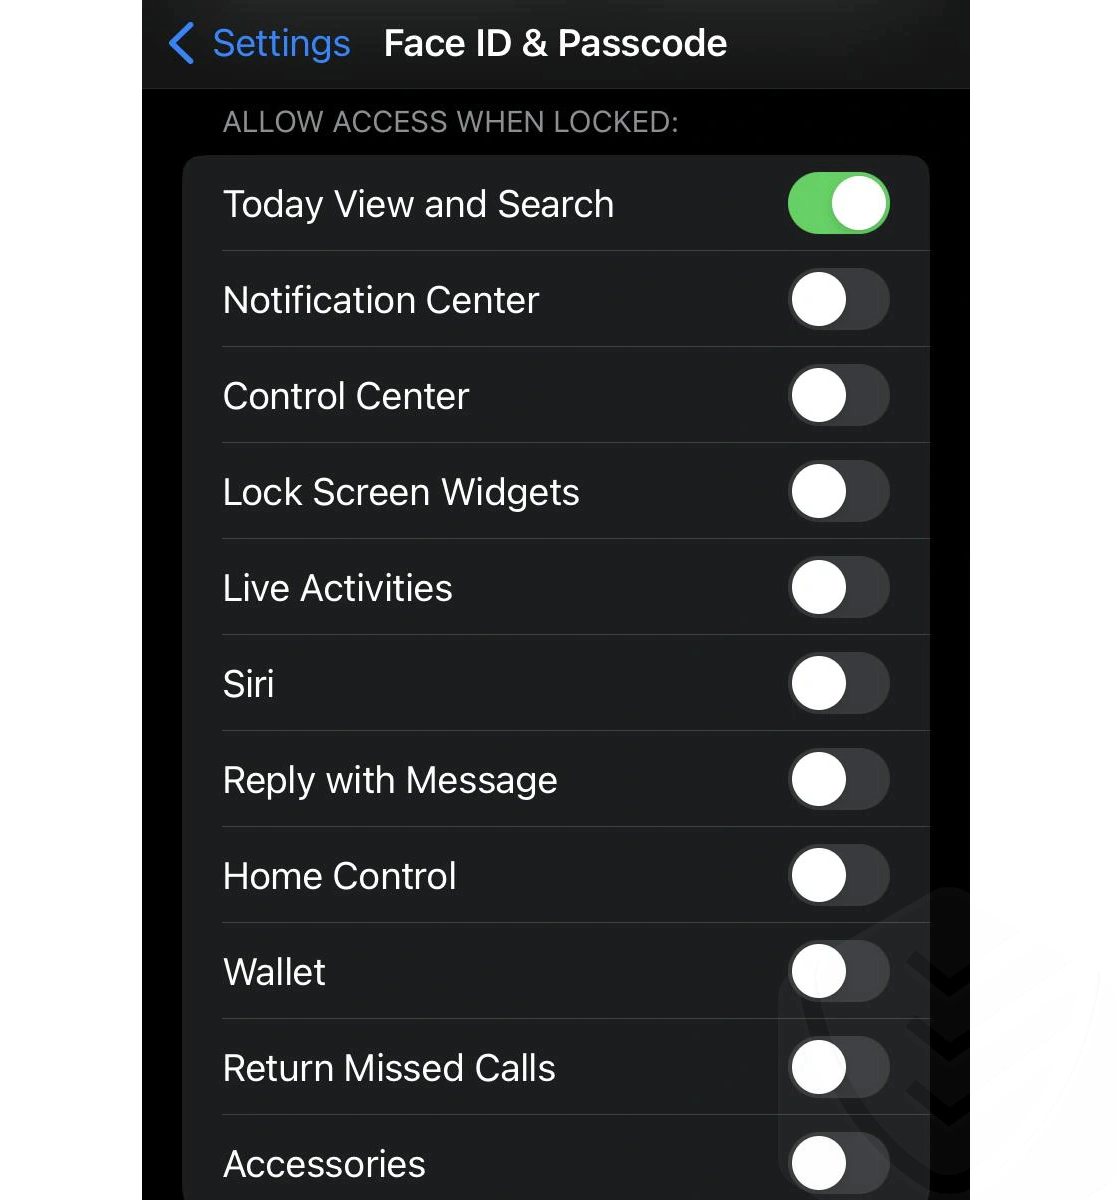 Face ID and passcode settings